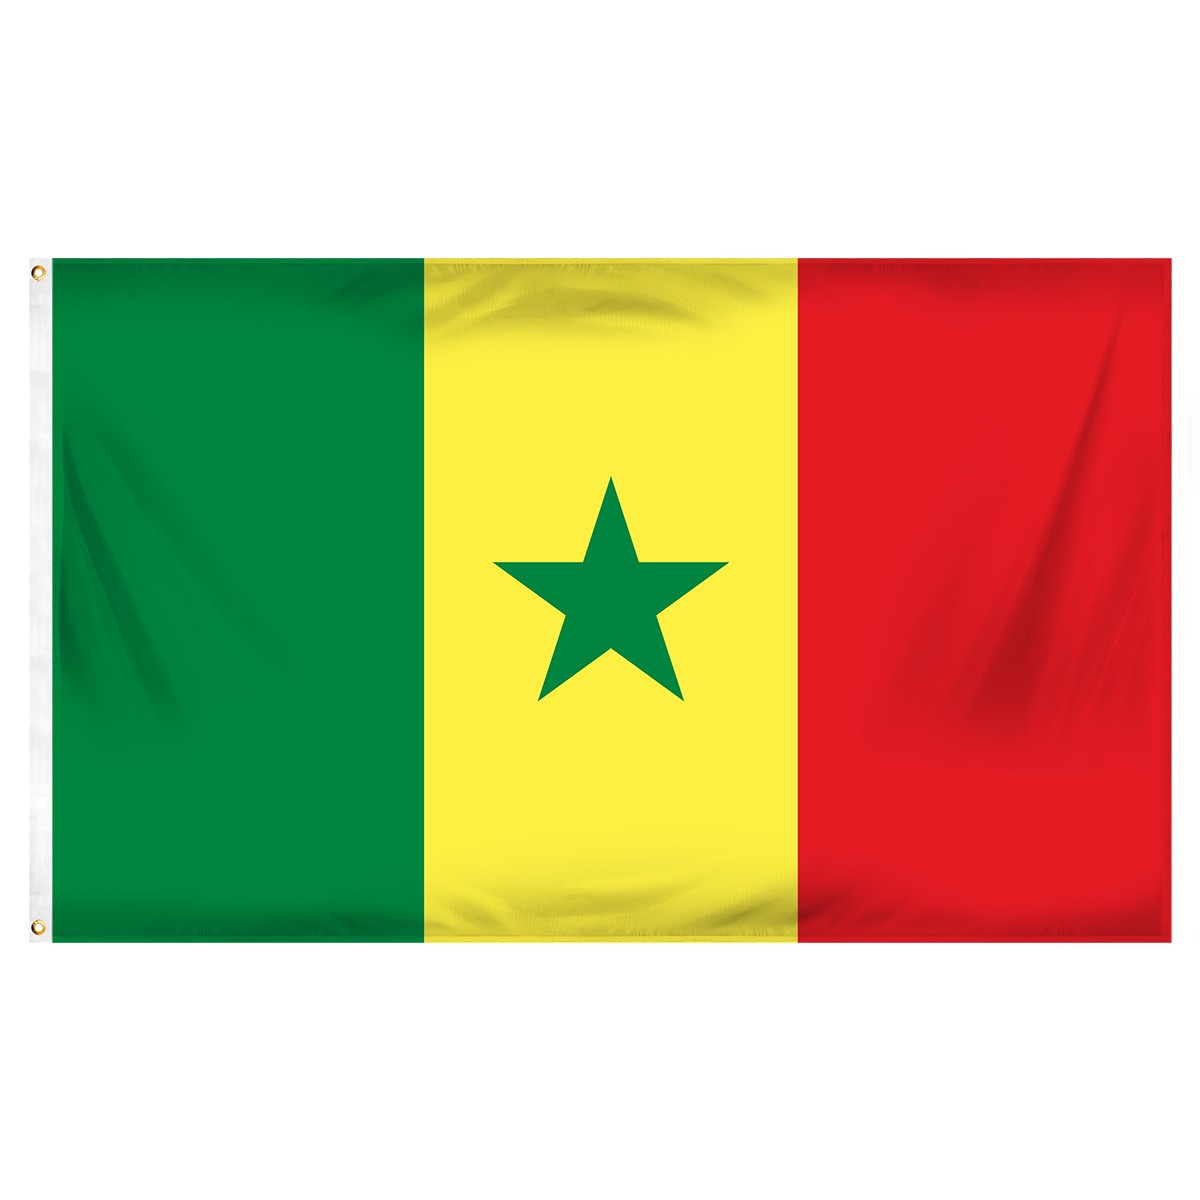 Senegal Posters and Banners